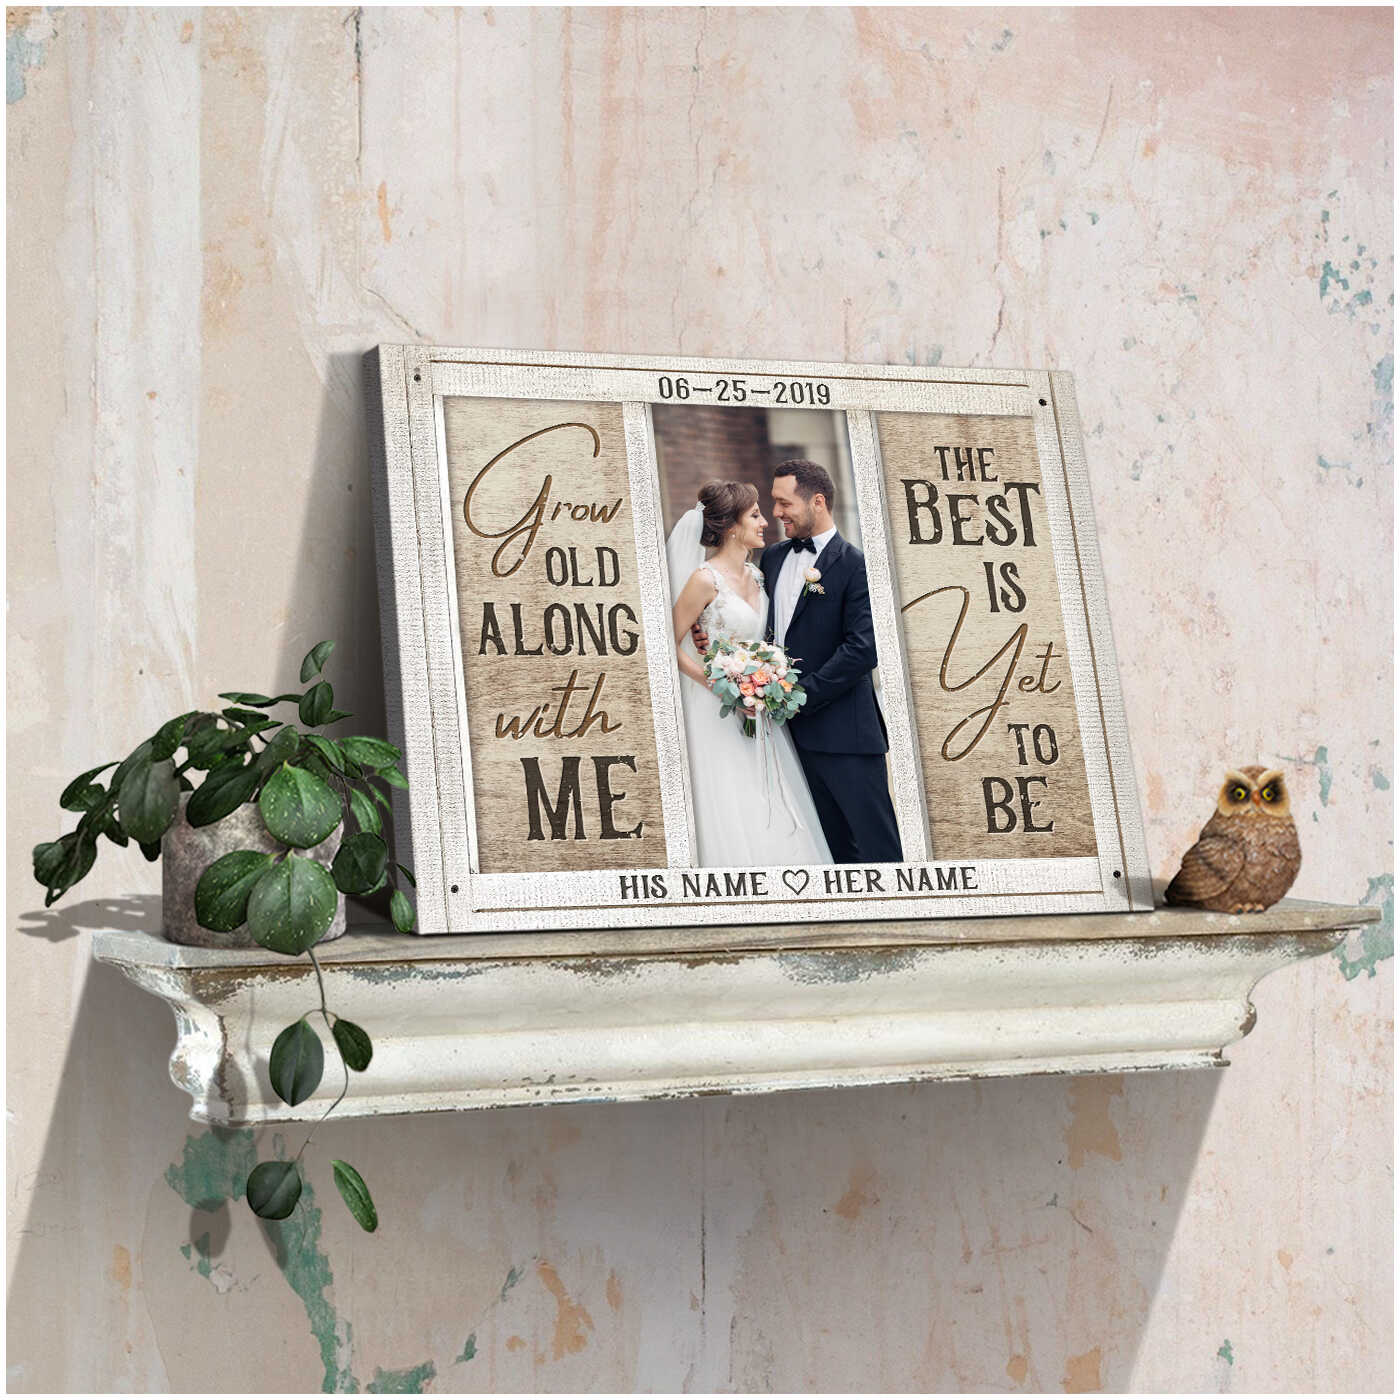 PERSONALISED WEDDING PHOTO Frame Gifts Presents For Bride and Groom Anniversary 